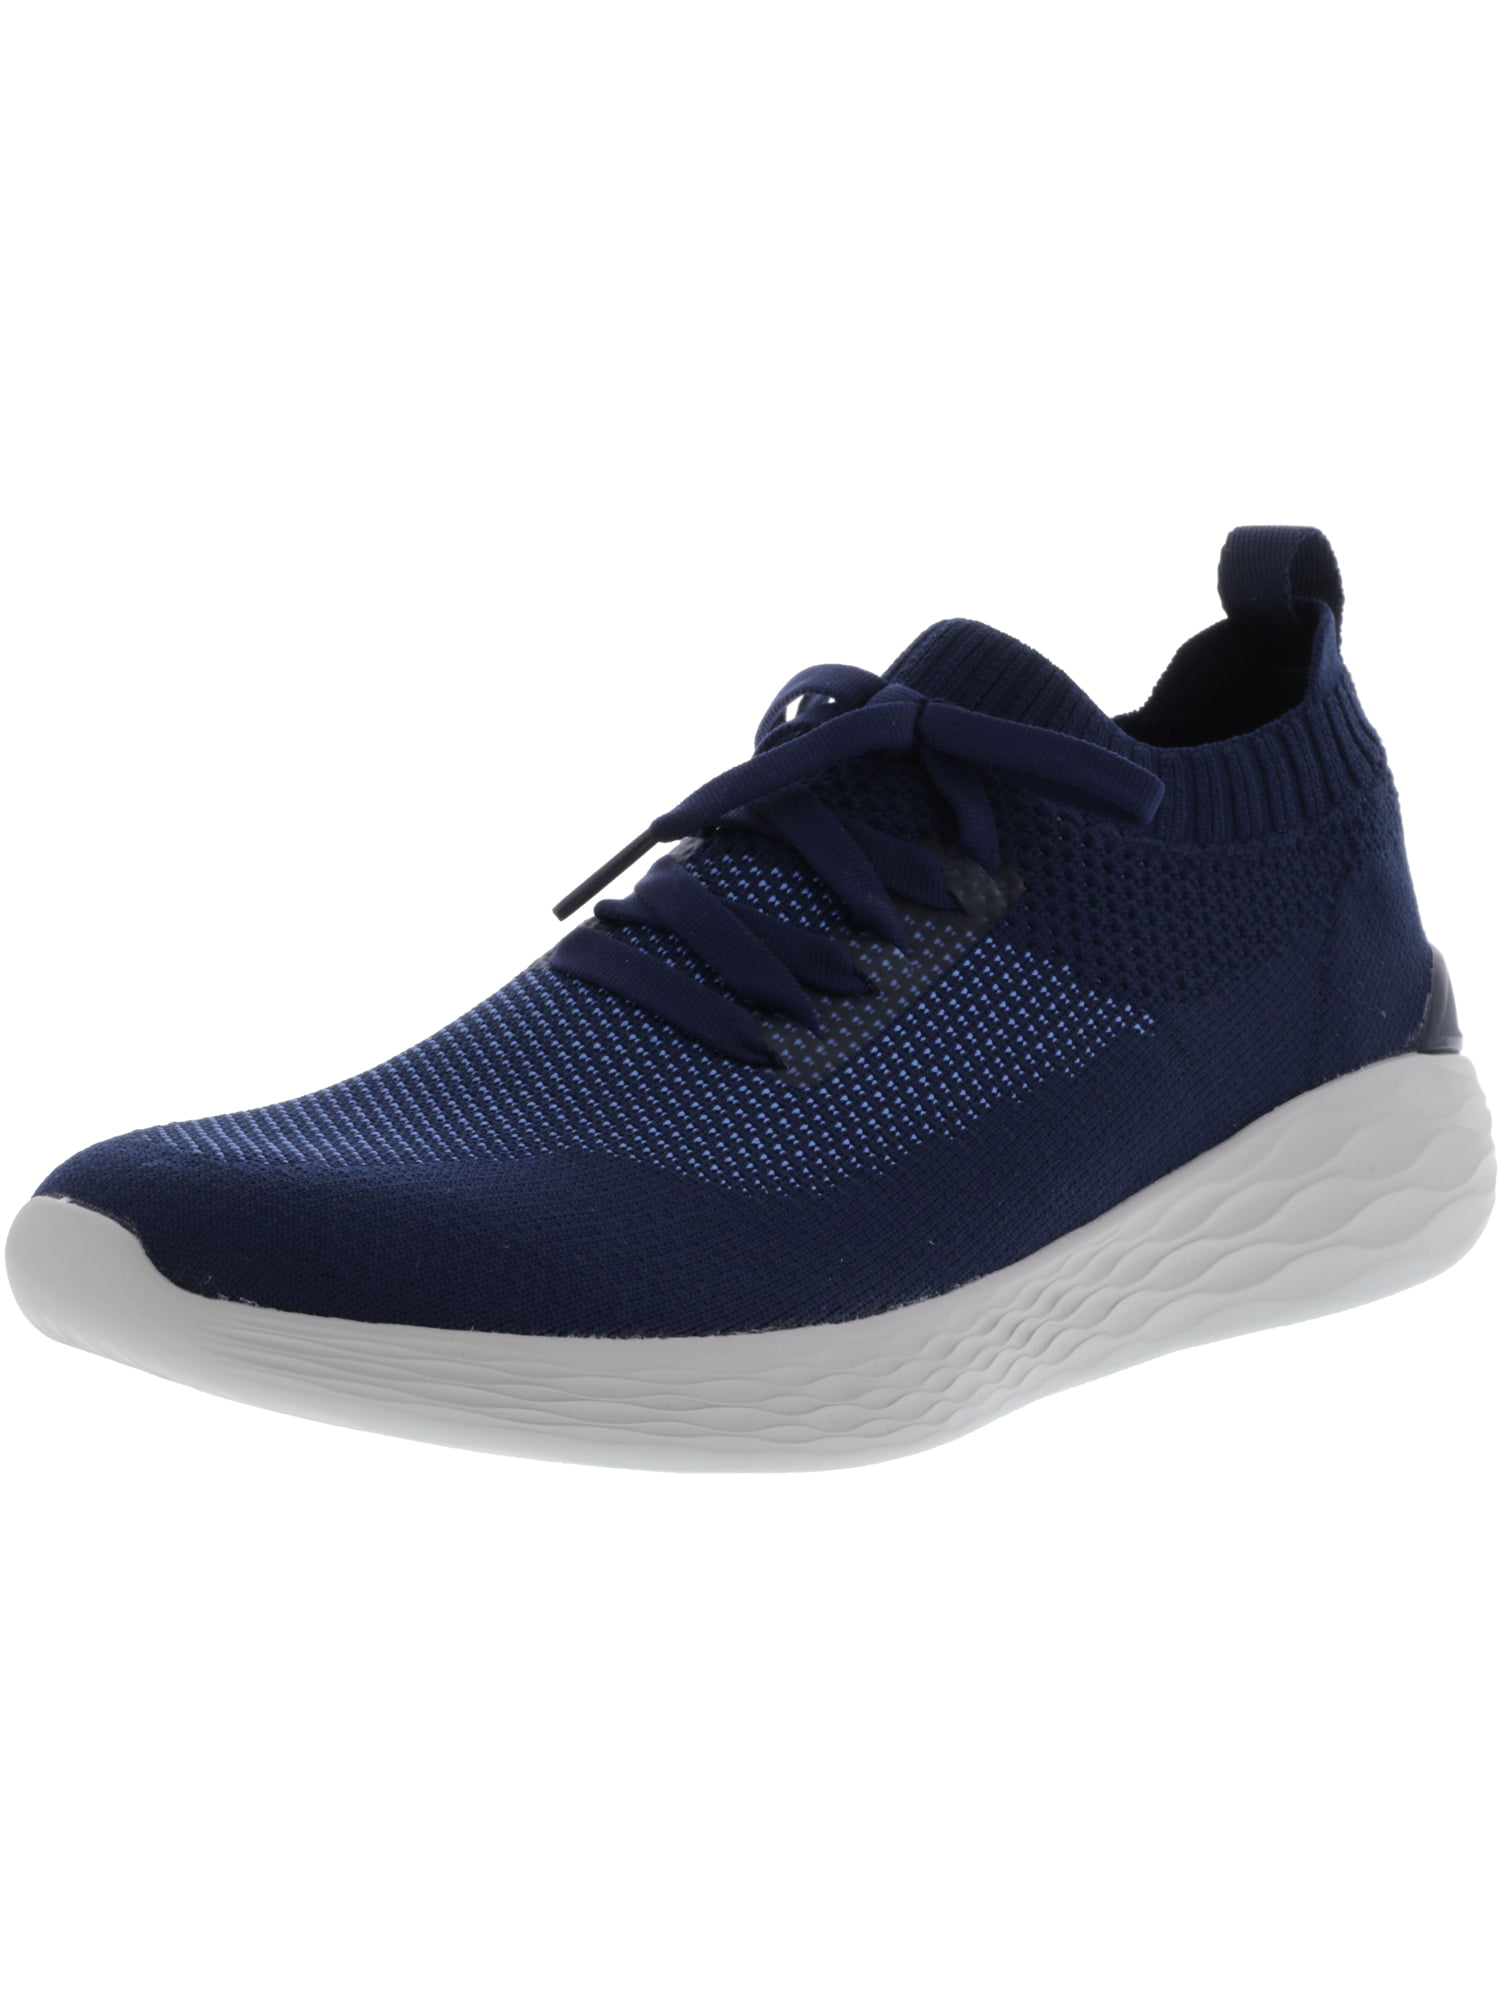 Altitude Navy Ankle-High Running Shoe 